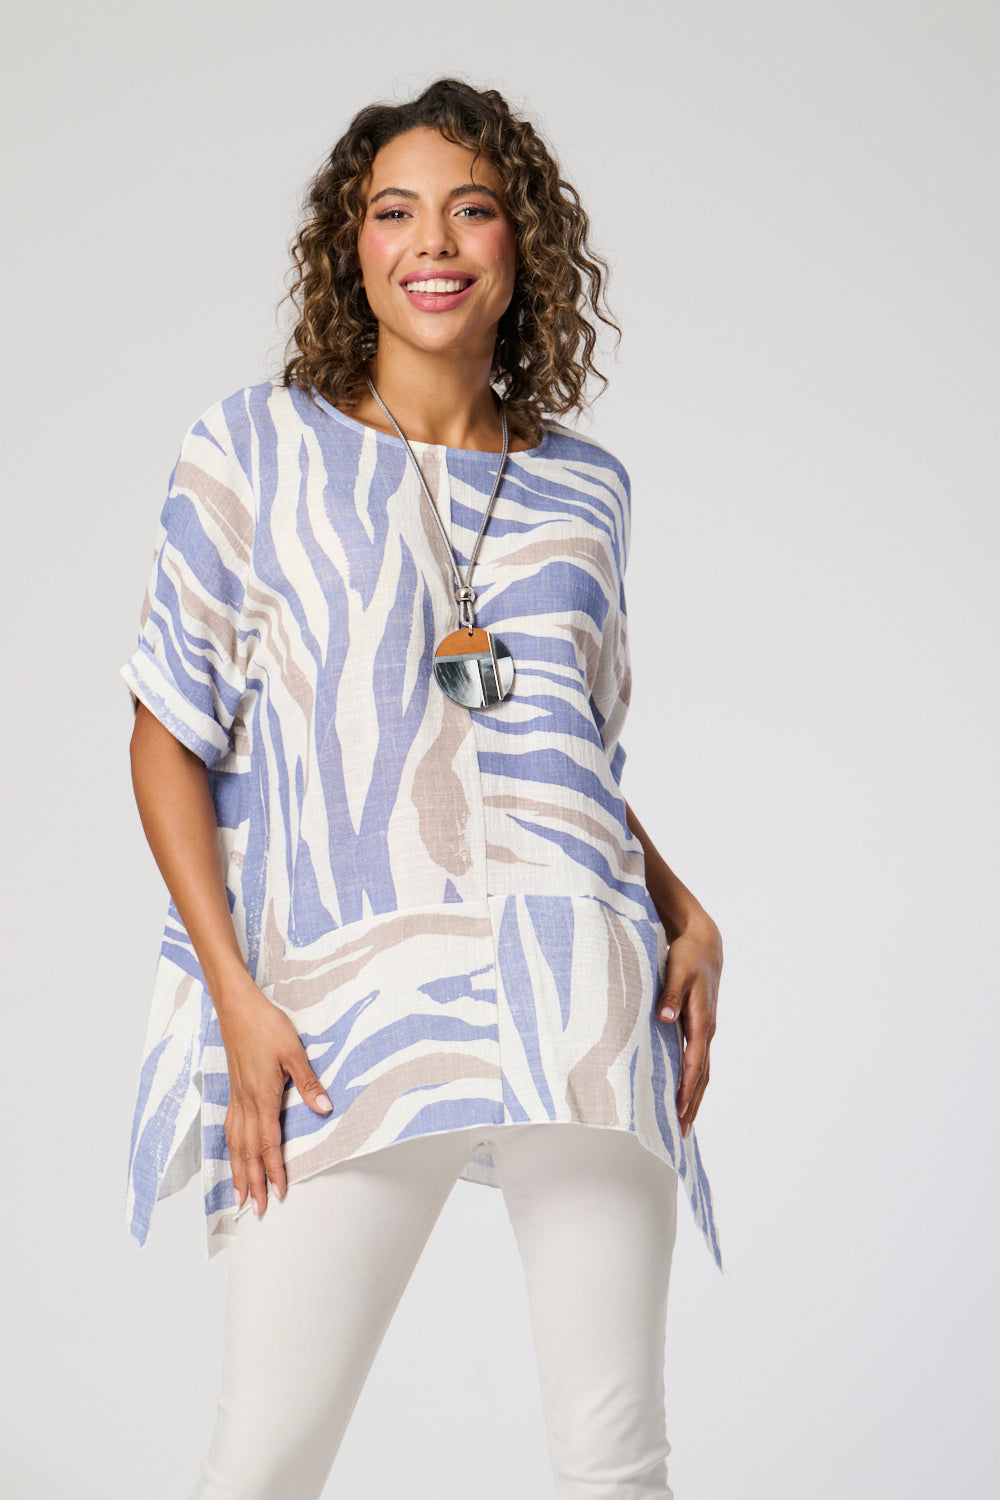 Saloos Zebra Print Panelled Cotton Top with Necklace